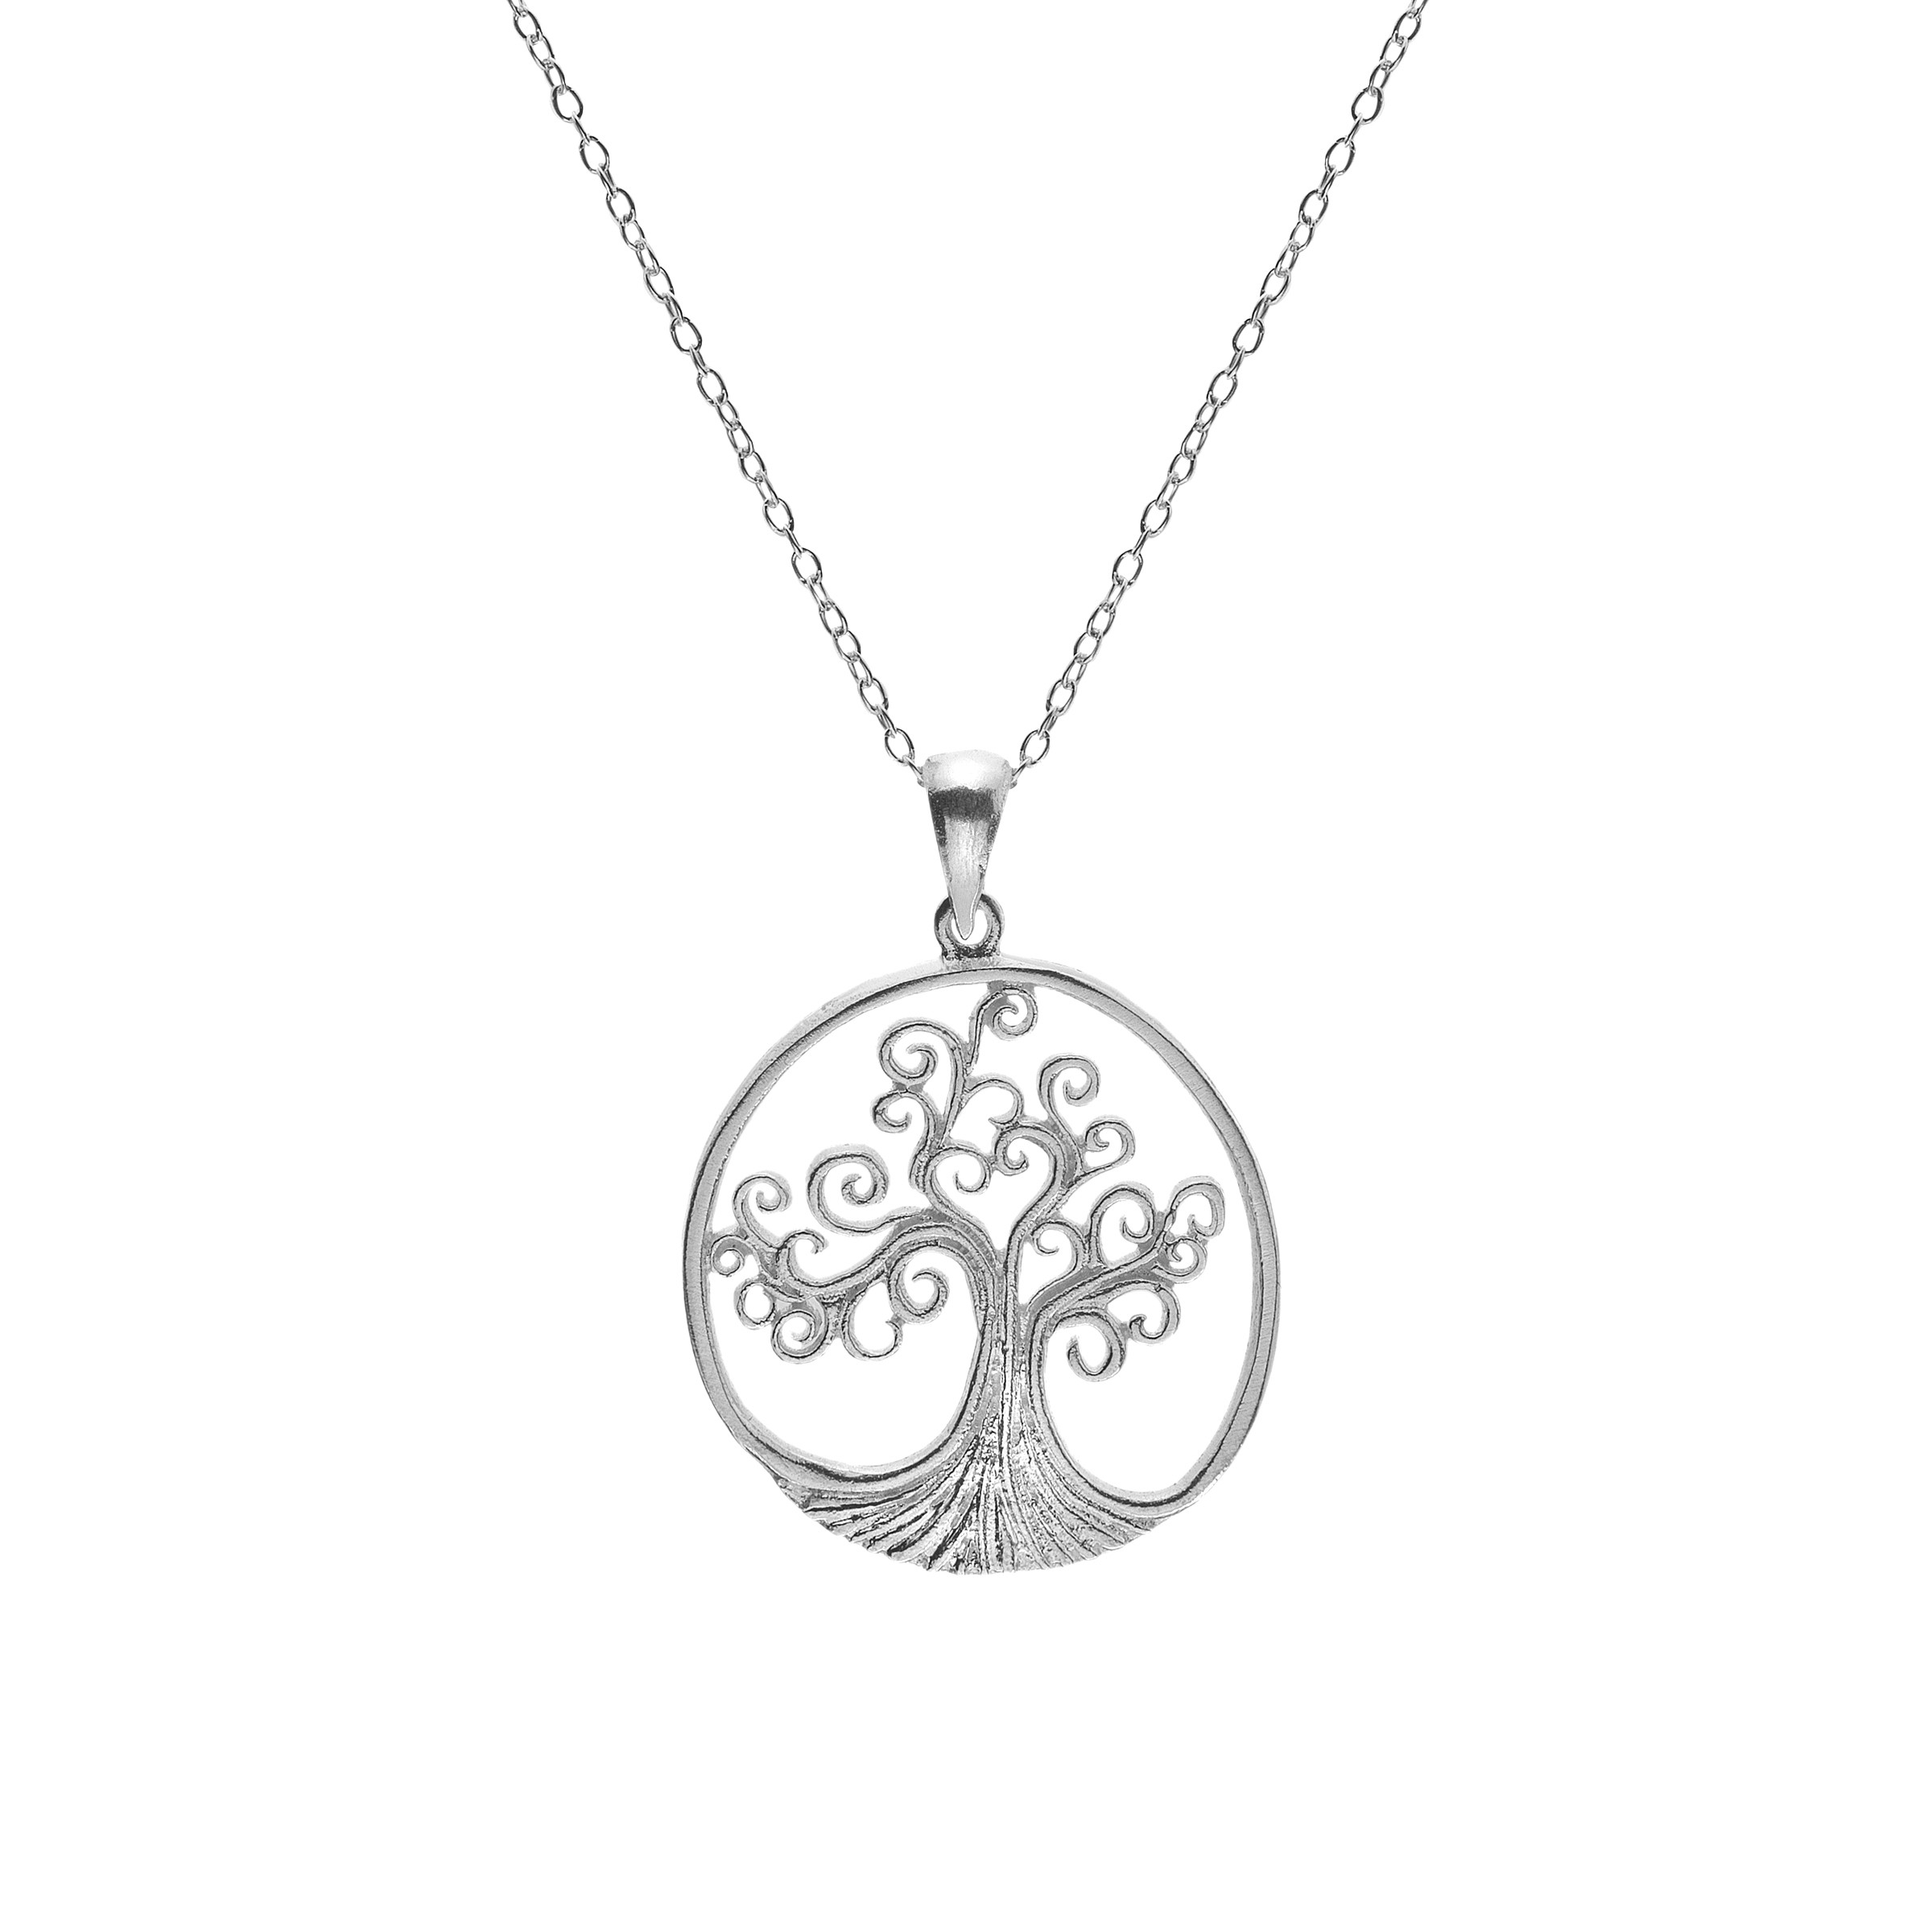 Celtic Spiral Tree of Life Sterling Silver Pendant Necklace 